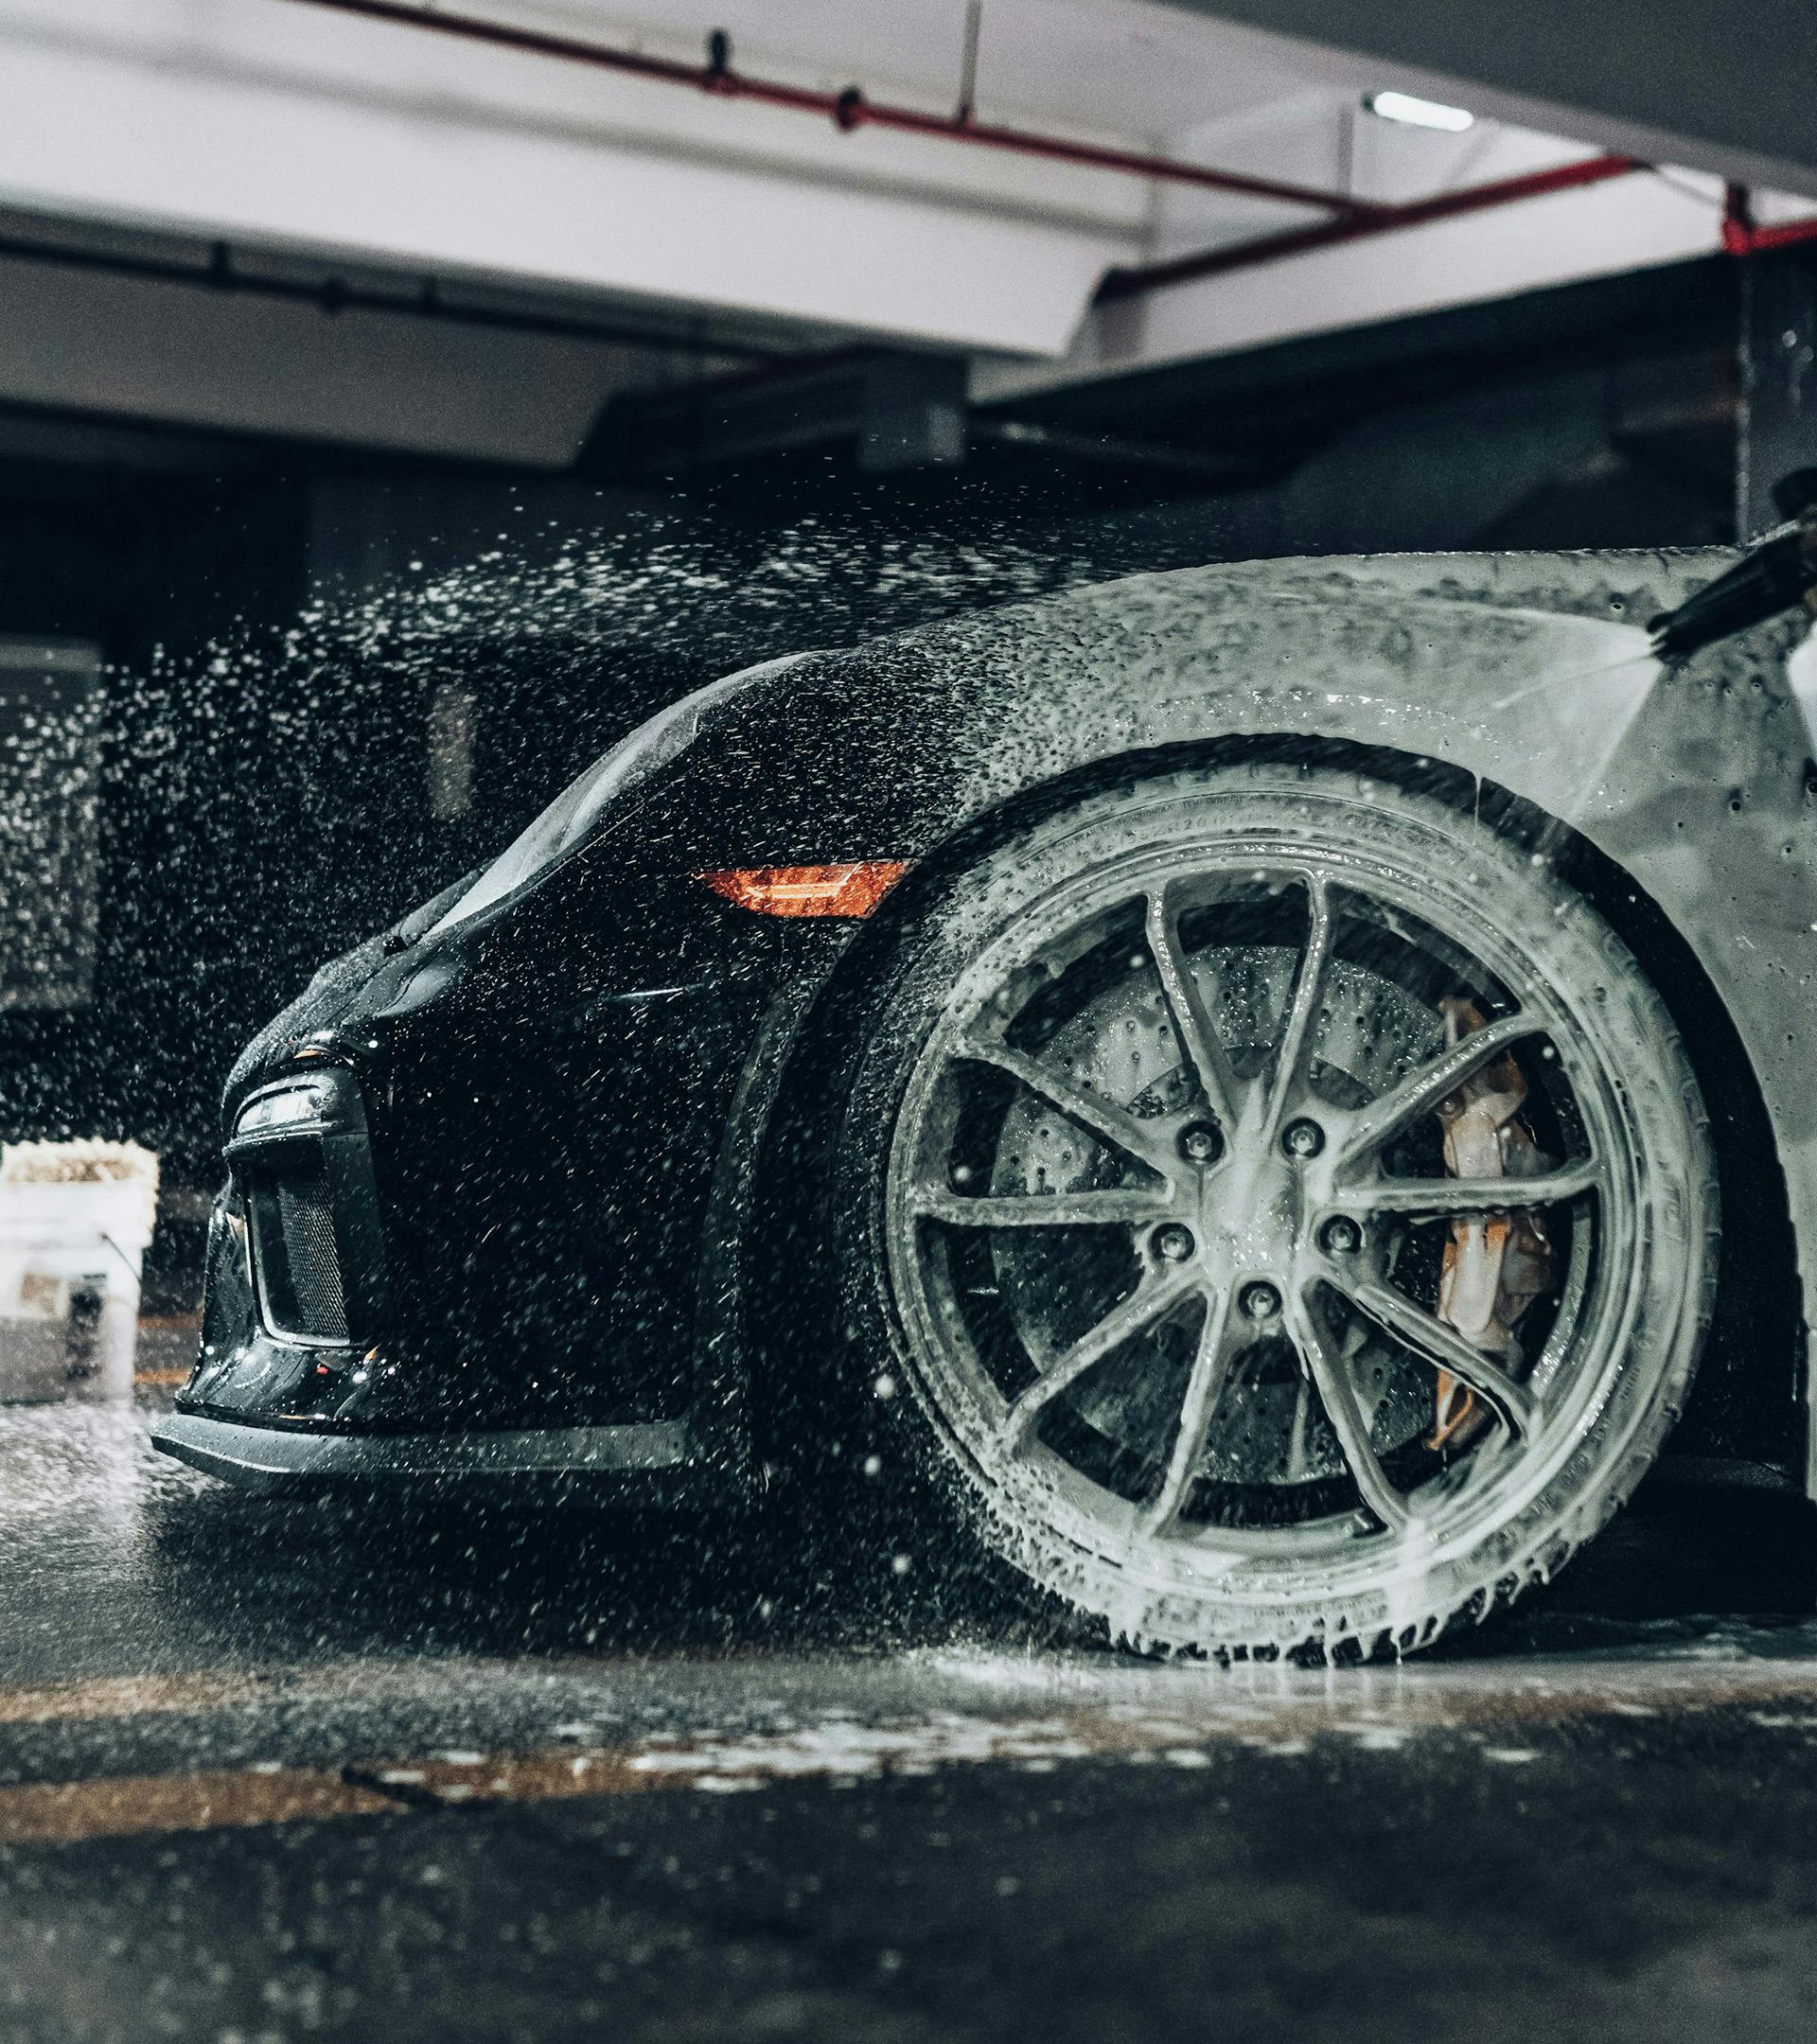 Picture of a car's driver side wheel covered with suds in a garage of sometype